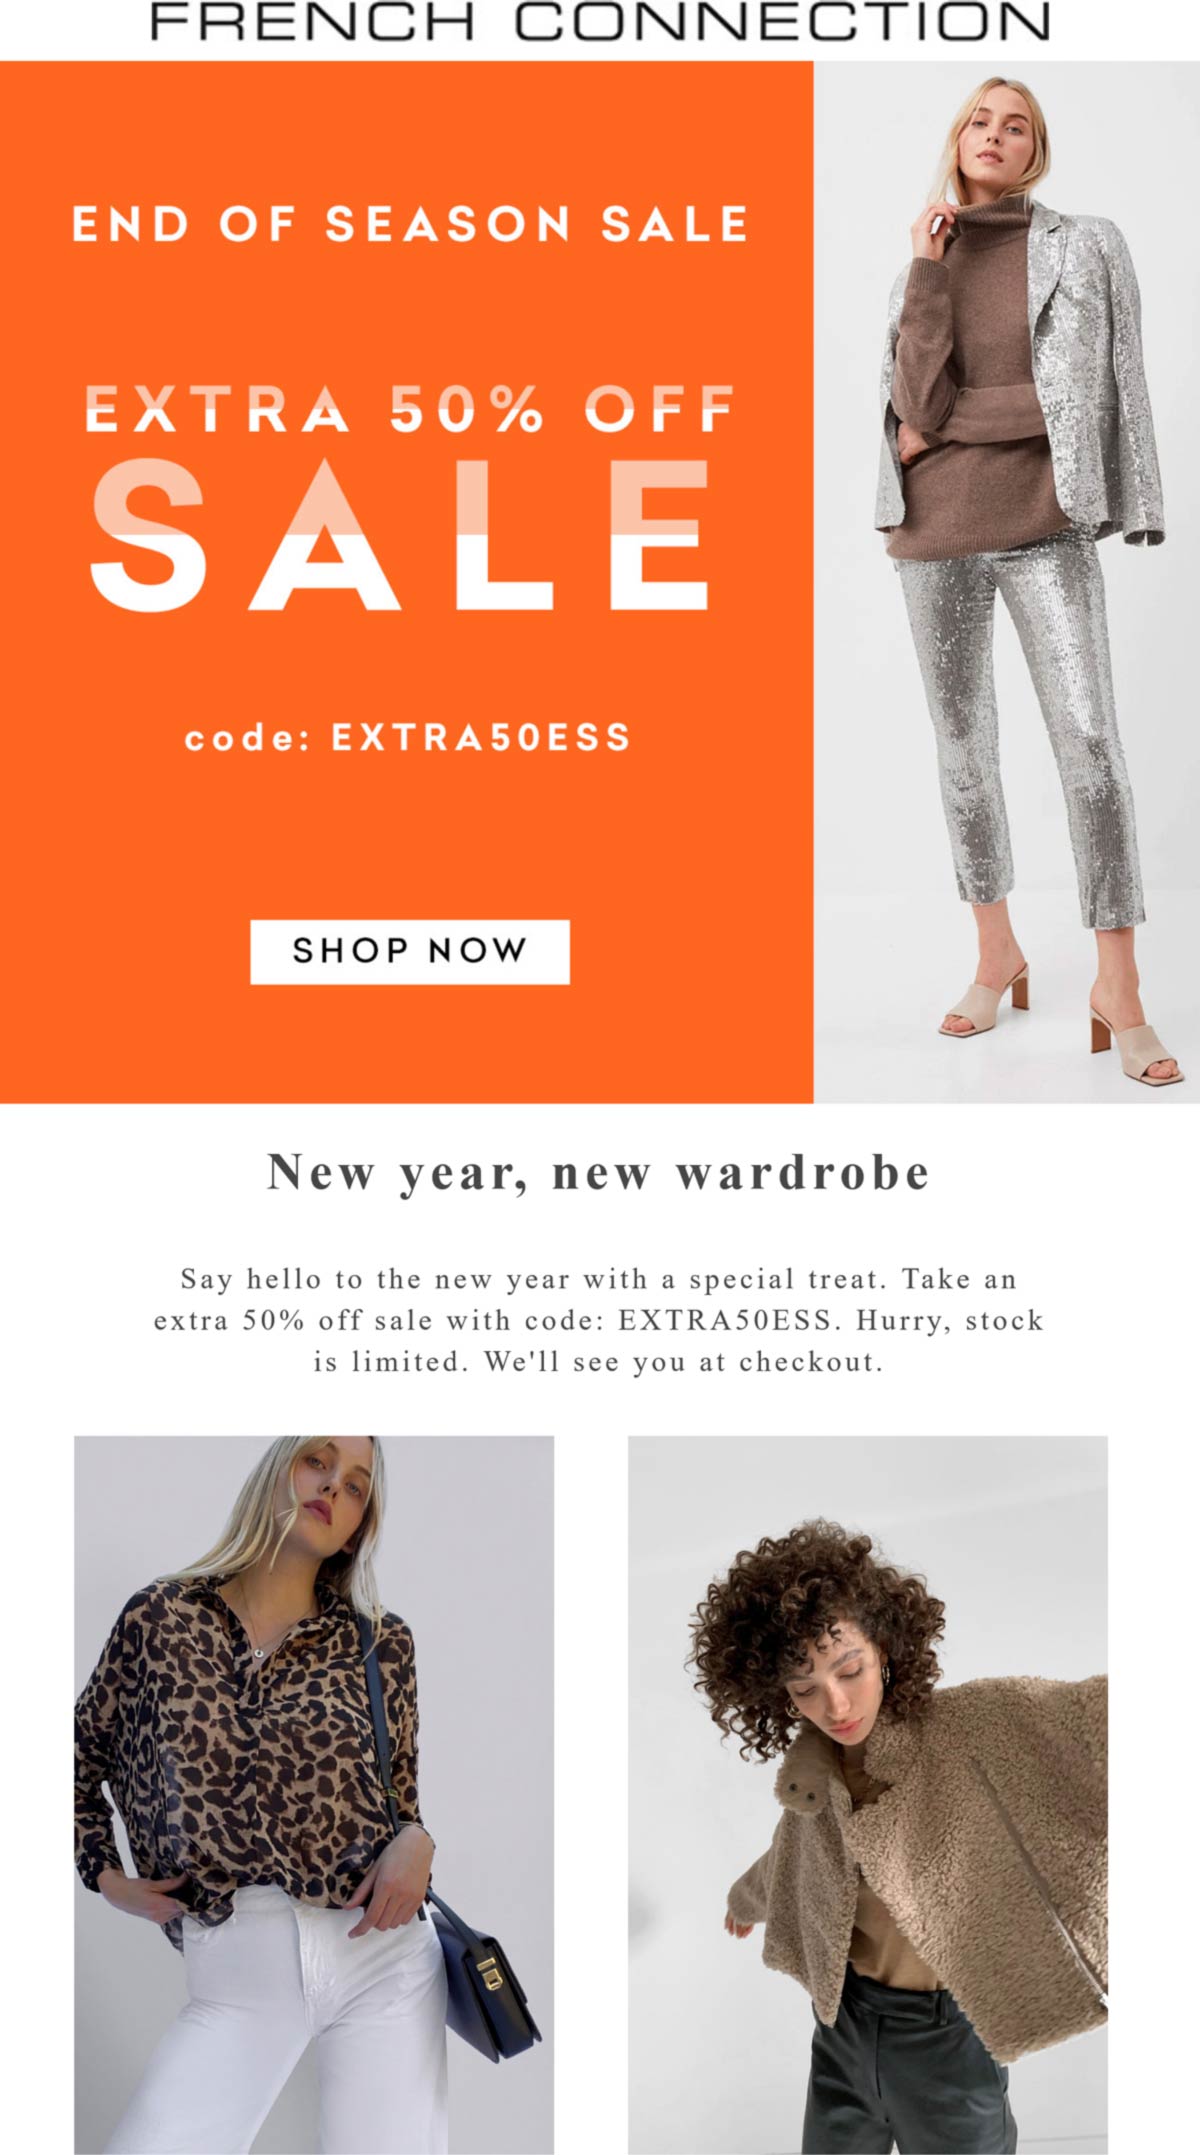 French Connection stores Coupon  Extra 50% off sale items at French Connection via promo code EXTRA50ESS #frenchconnection 